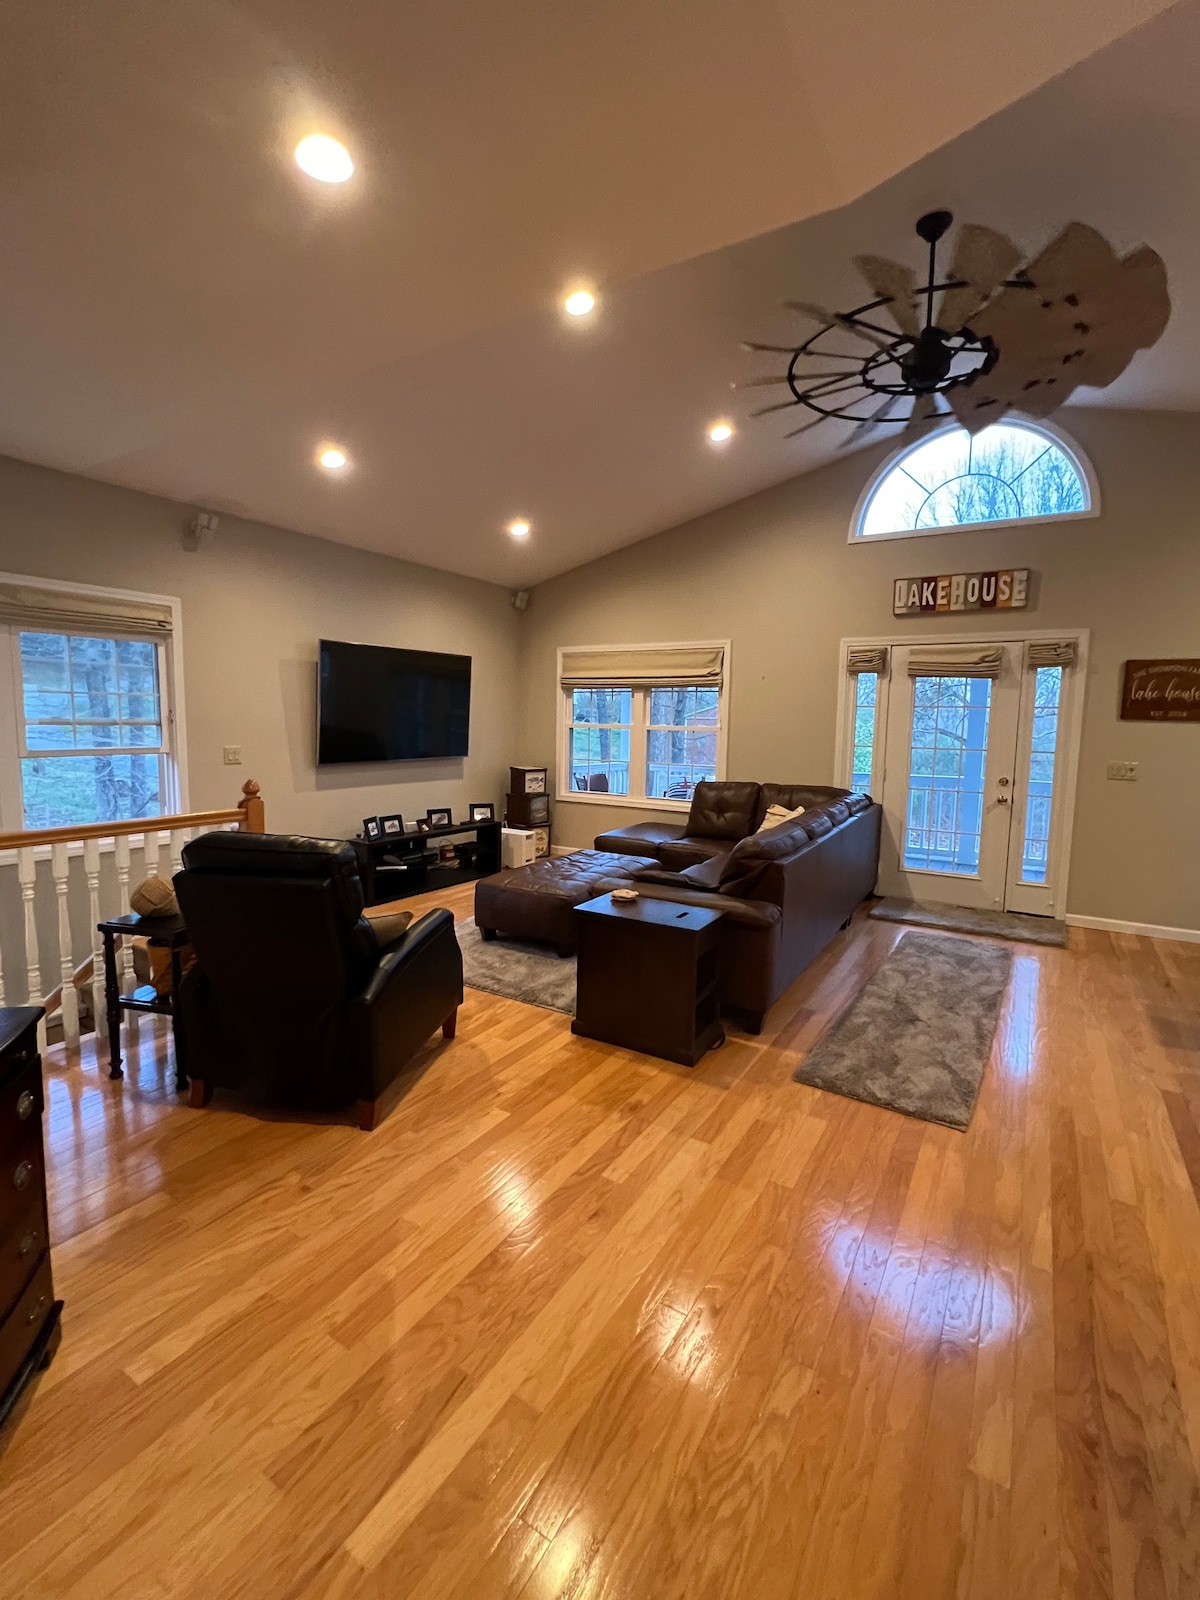 5 BR/3 BA lake home in Grand Rivers, KY